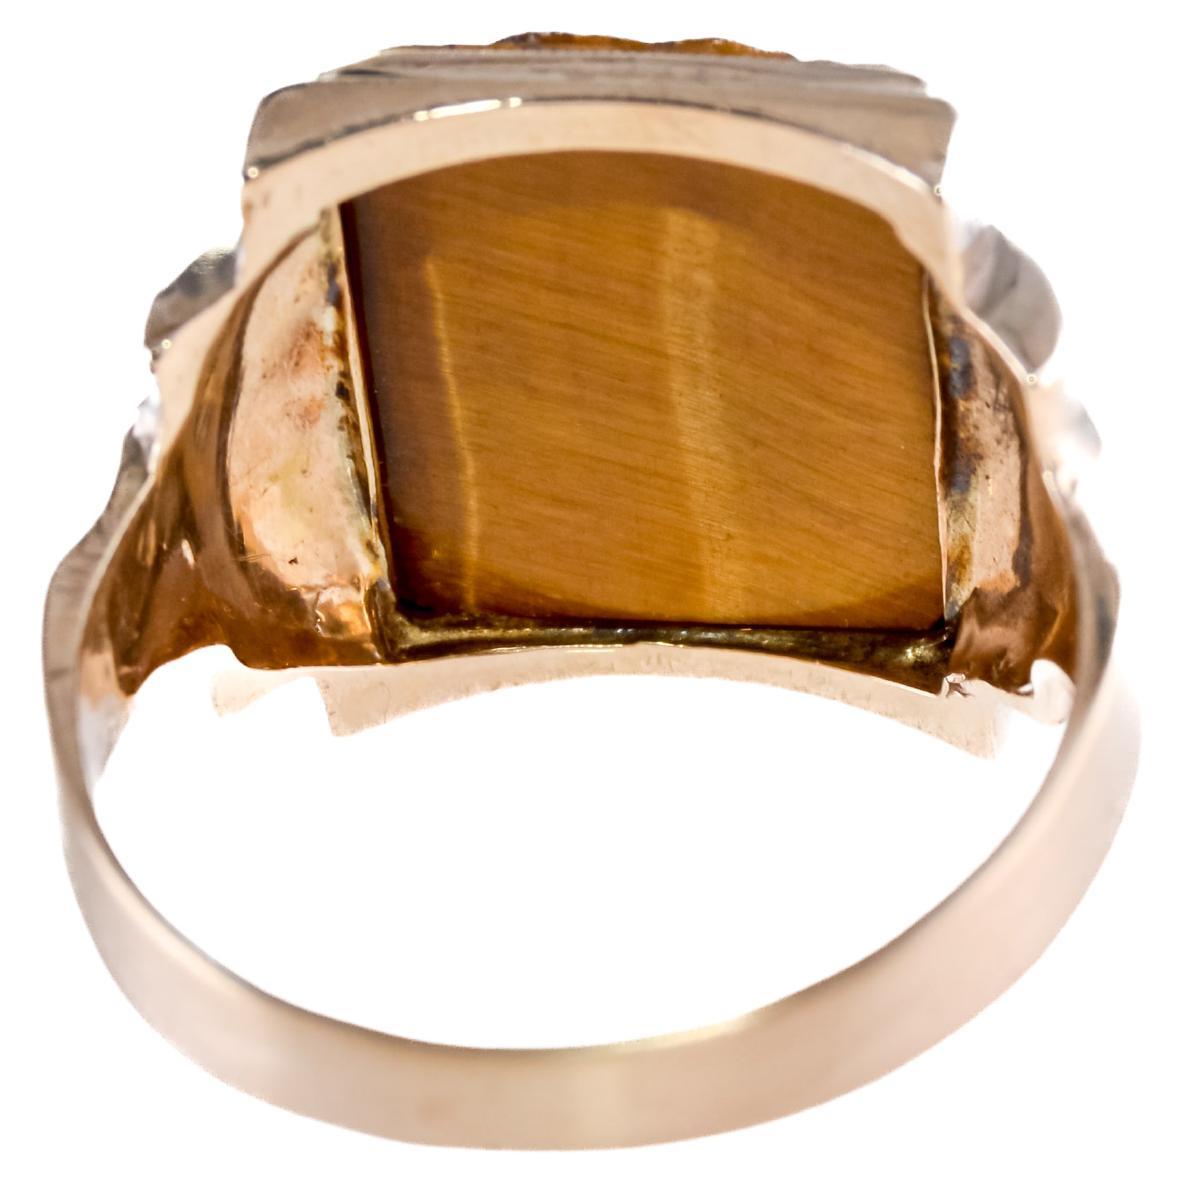 Unisex Art Deco 10kt. Solid Gold Tiger Eye Hand Constructed Ring from 1940s For Sale 5